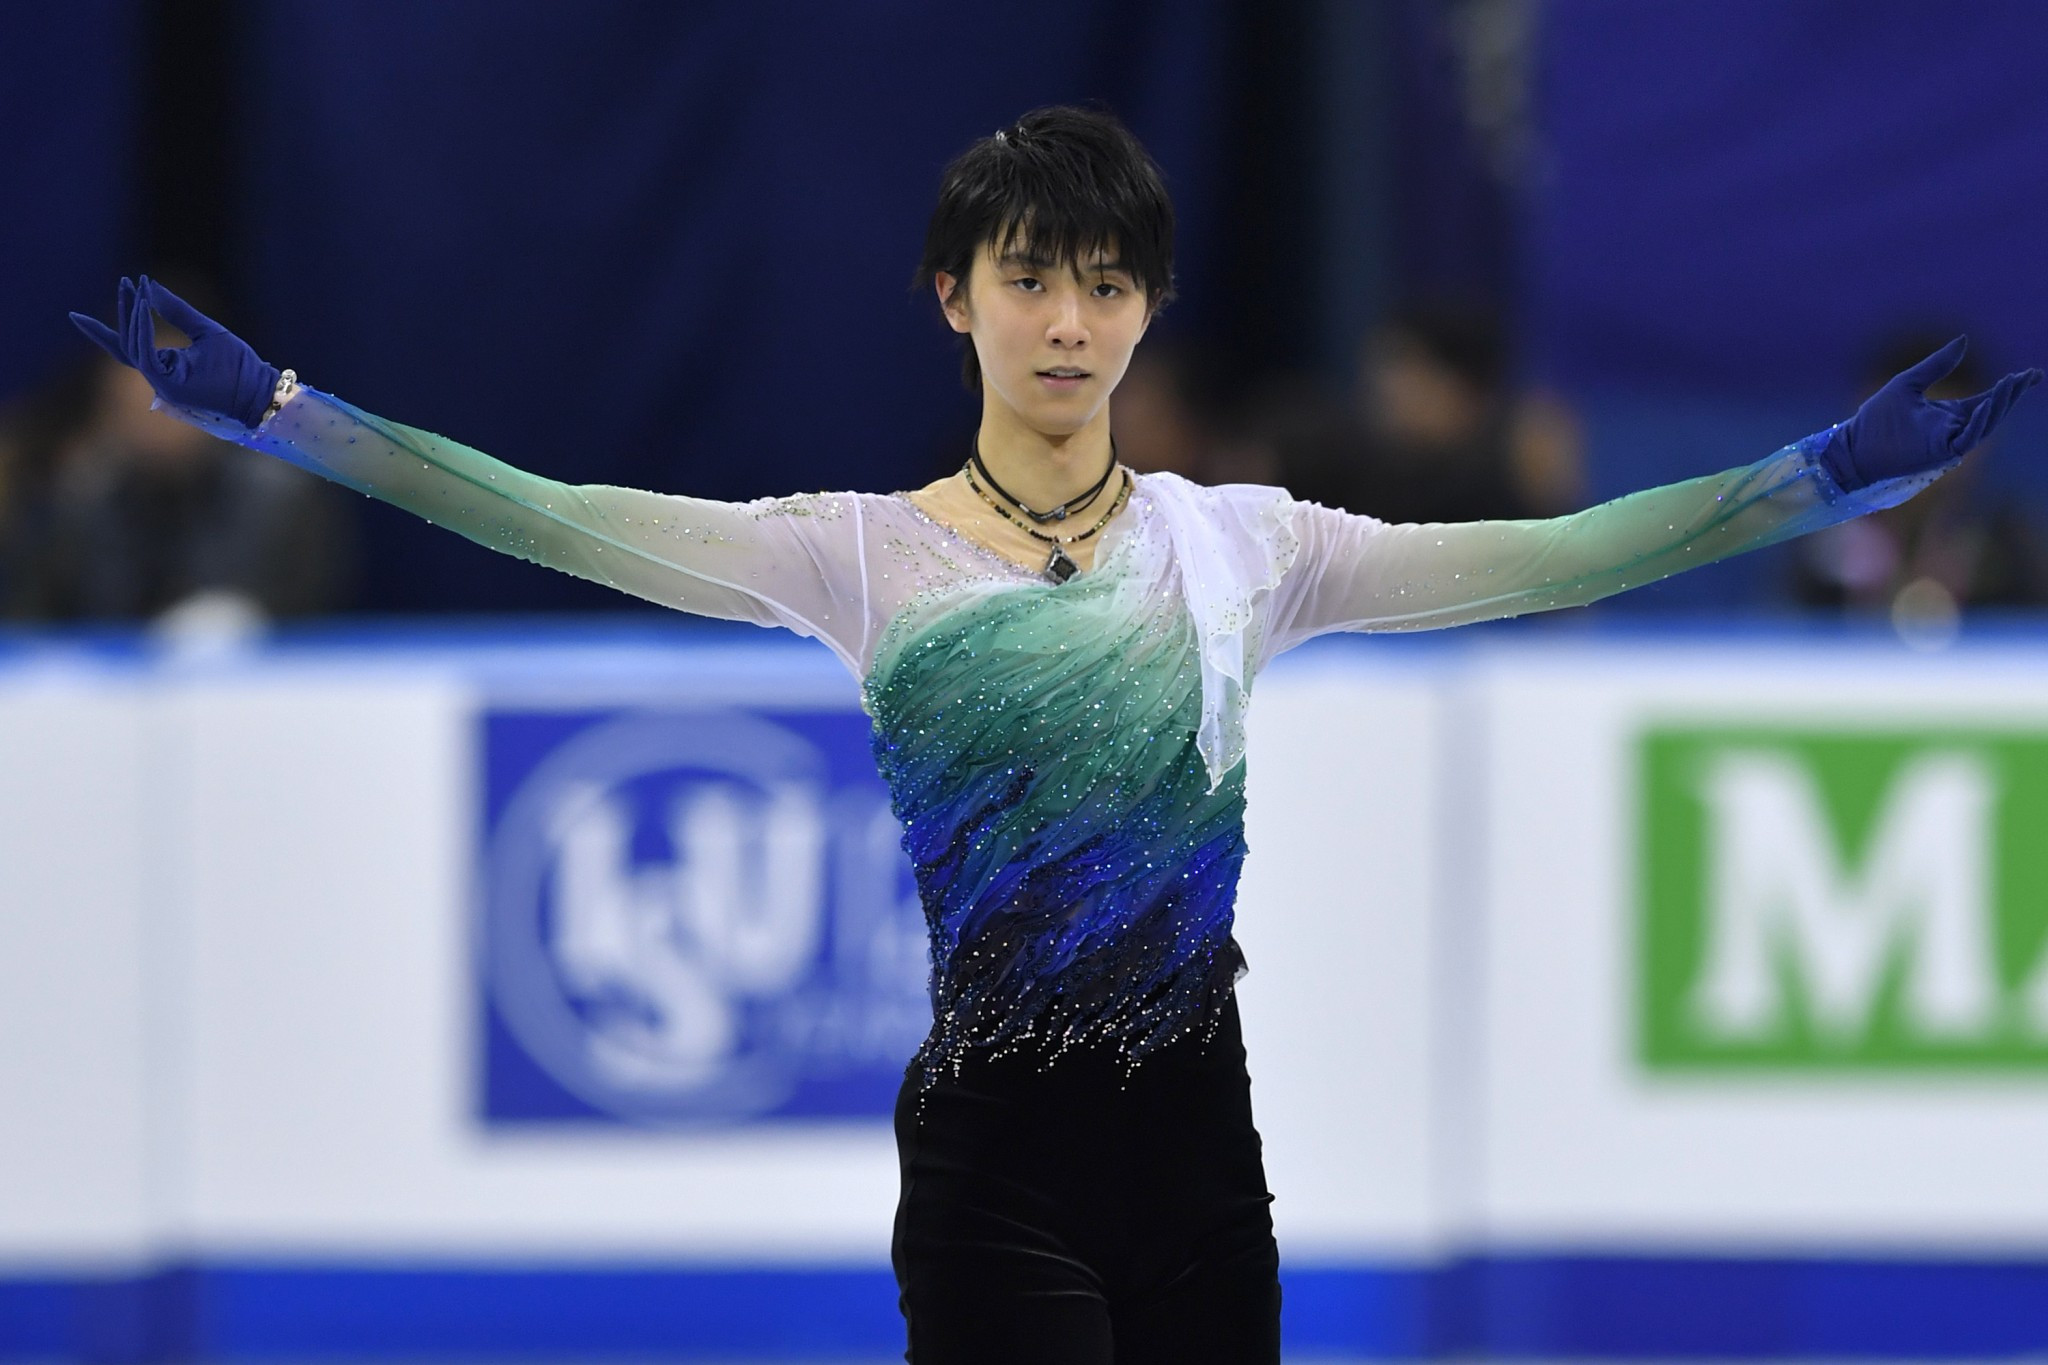 Videos featuring figure skater Hanyu performing off-ice reach one